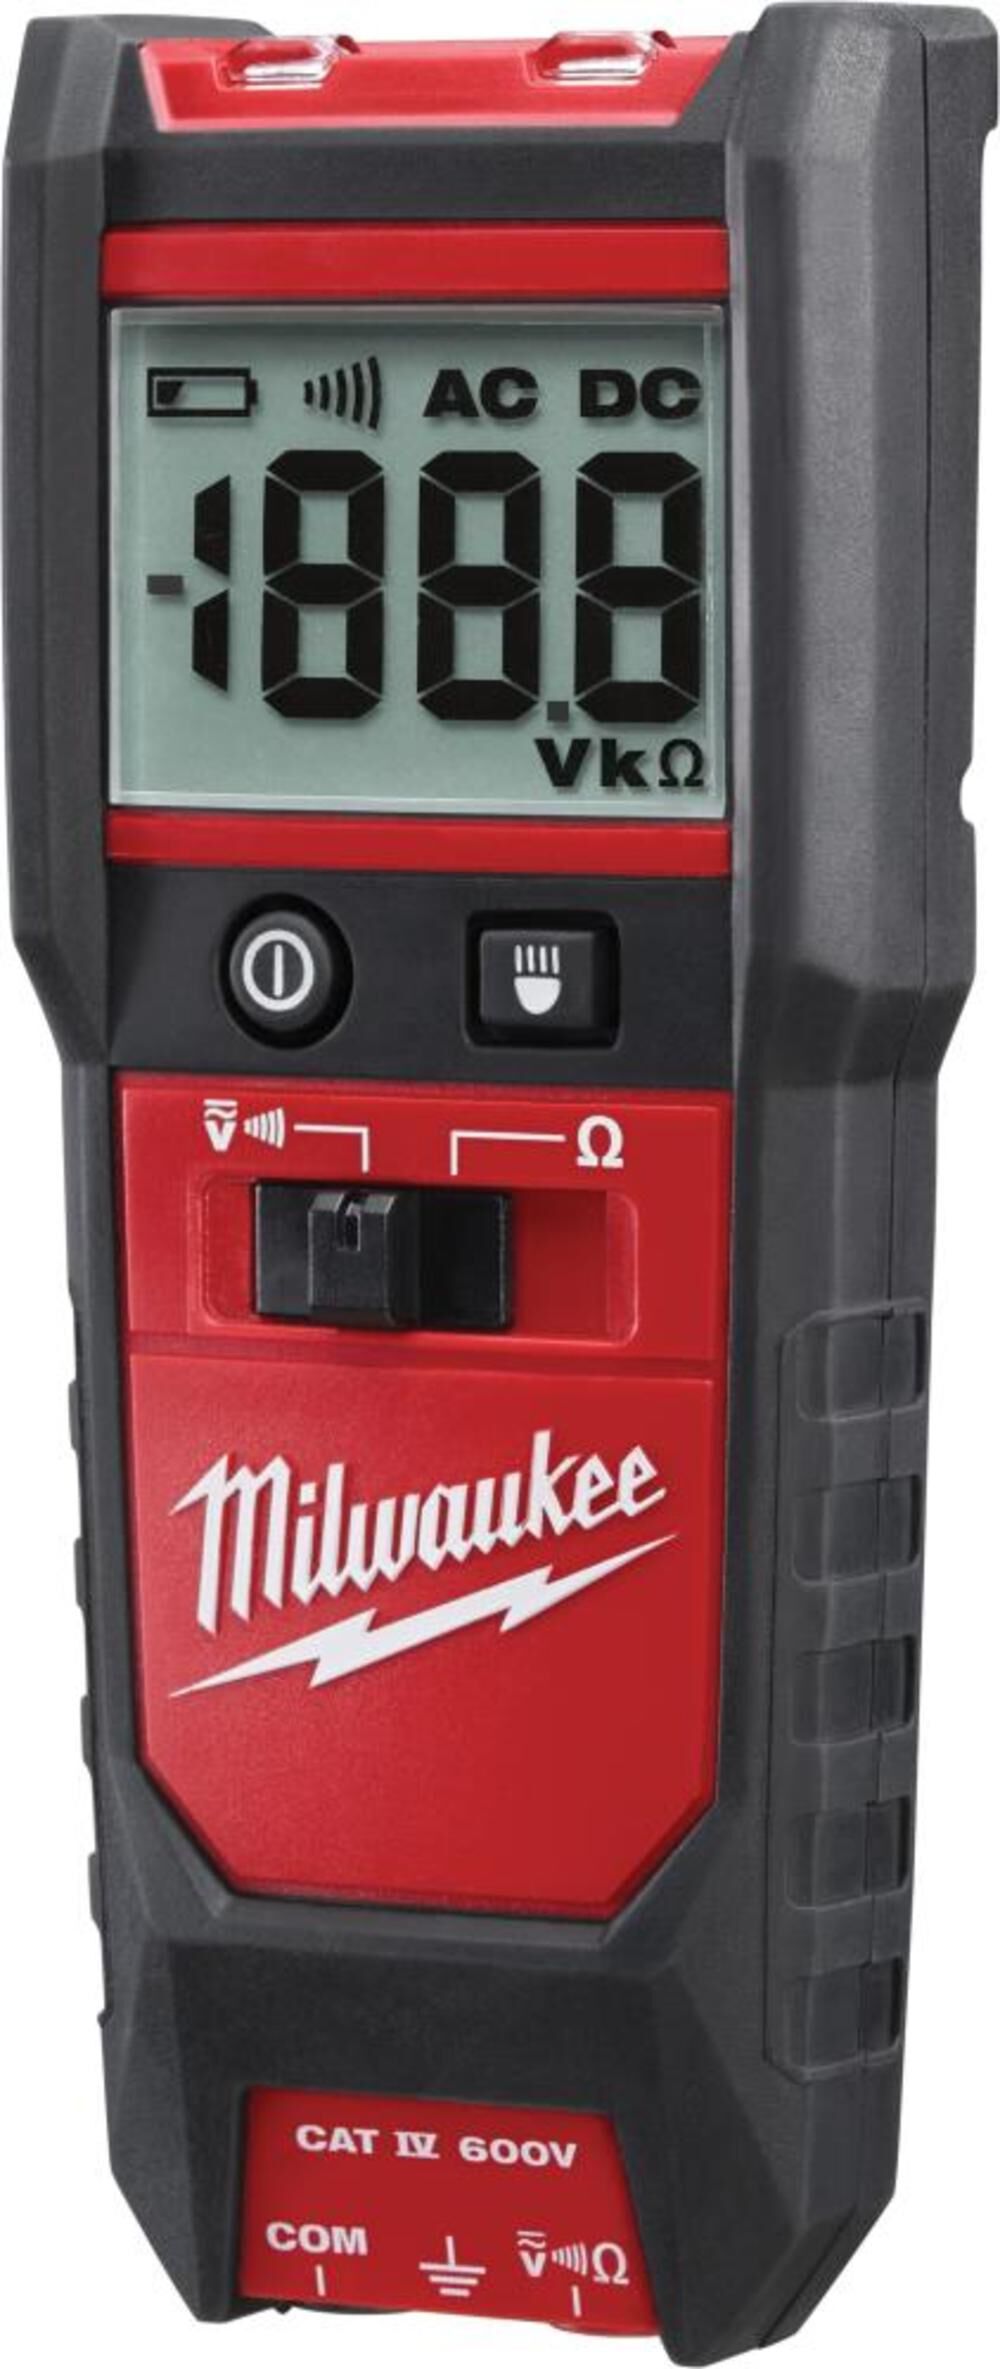 Milwaukee Auto Voltage/Continuity Tester with Resistance Measurement Set  2213-20 from Milwaukee Acme Tools